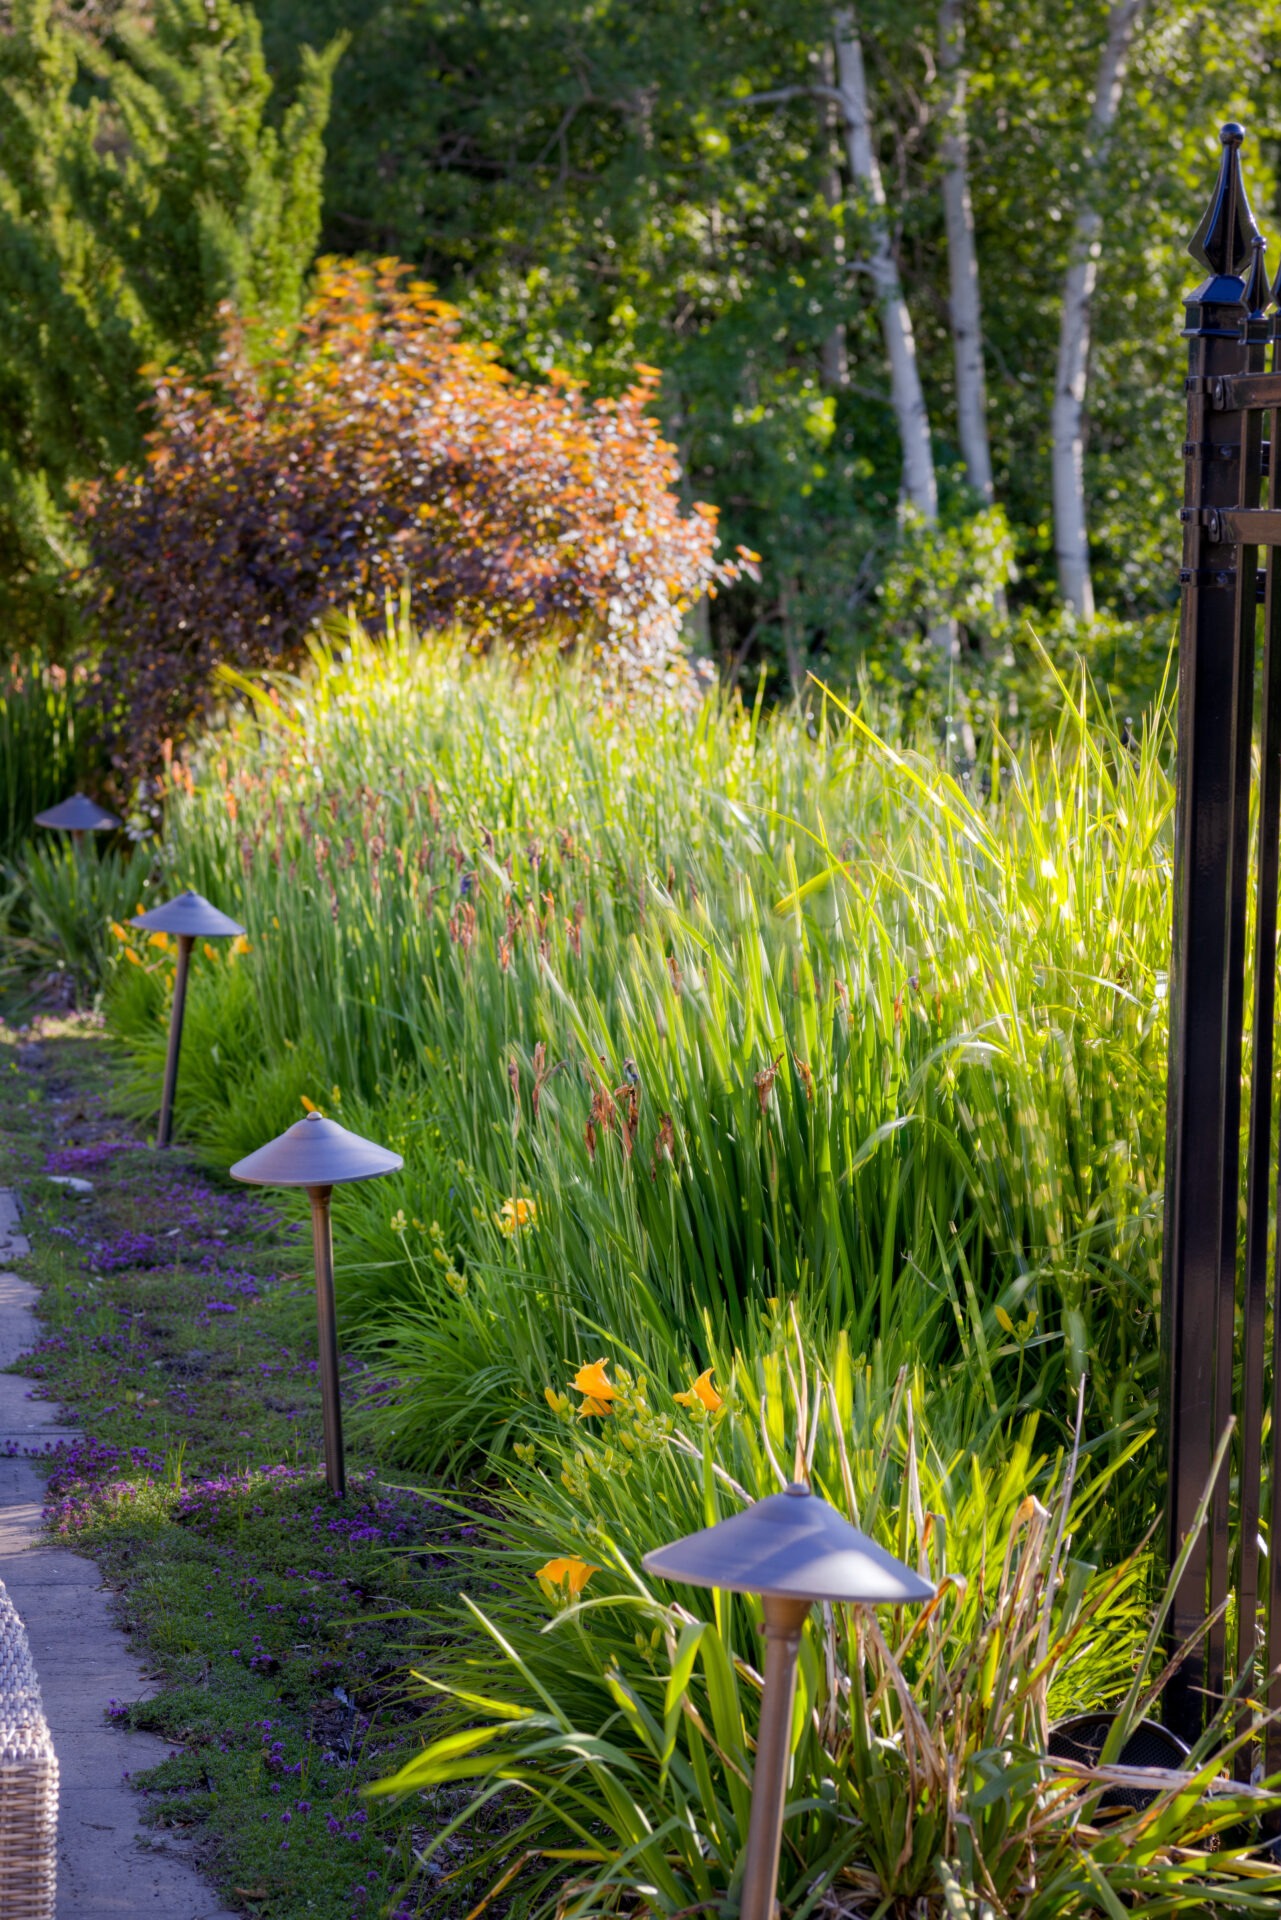 A serene garden path lined with green foliage and yellow flowers, illuminated by mushroom-shaped lights beside a decorative wrought iron fence.